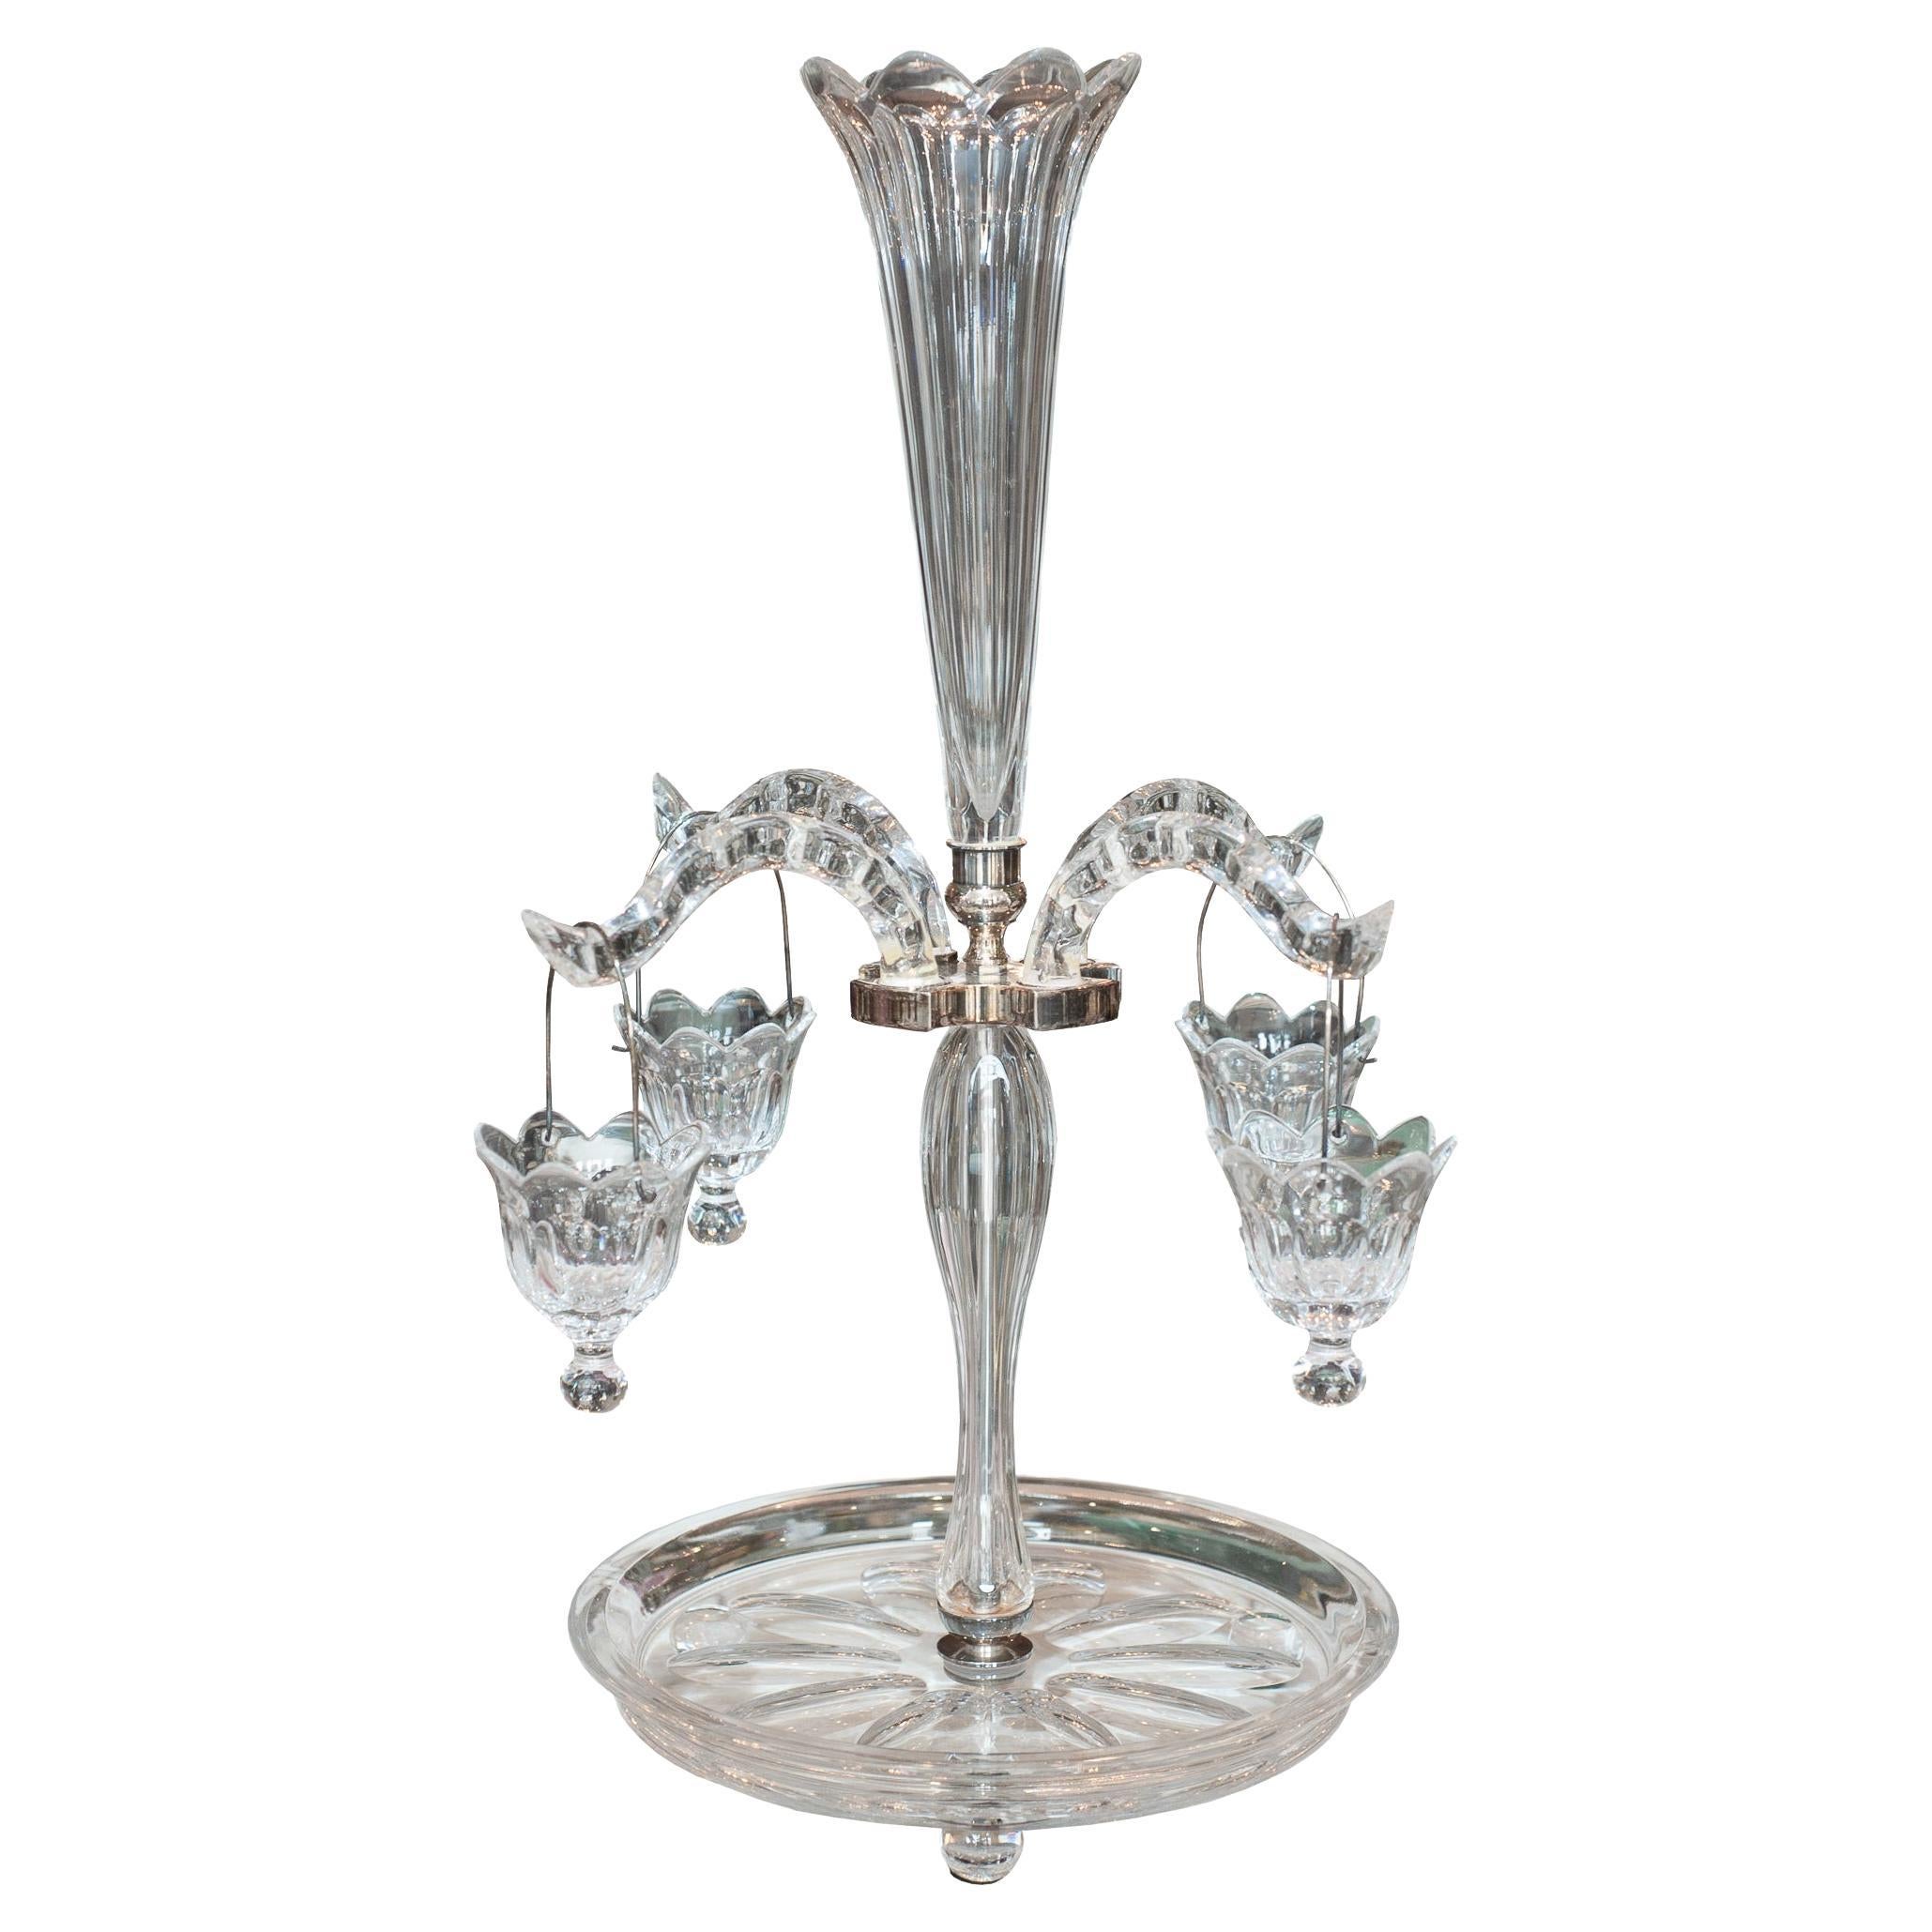 Antique French Large Scale Epergne / Centerpiece For Sale